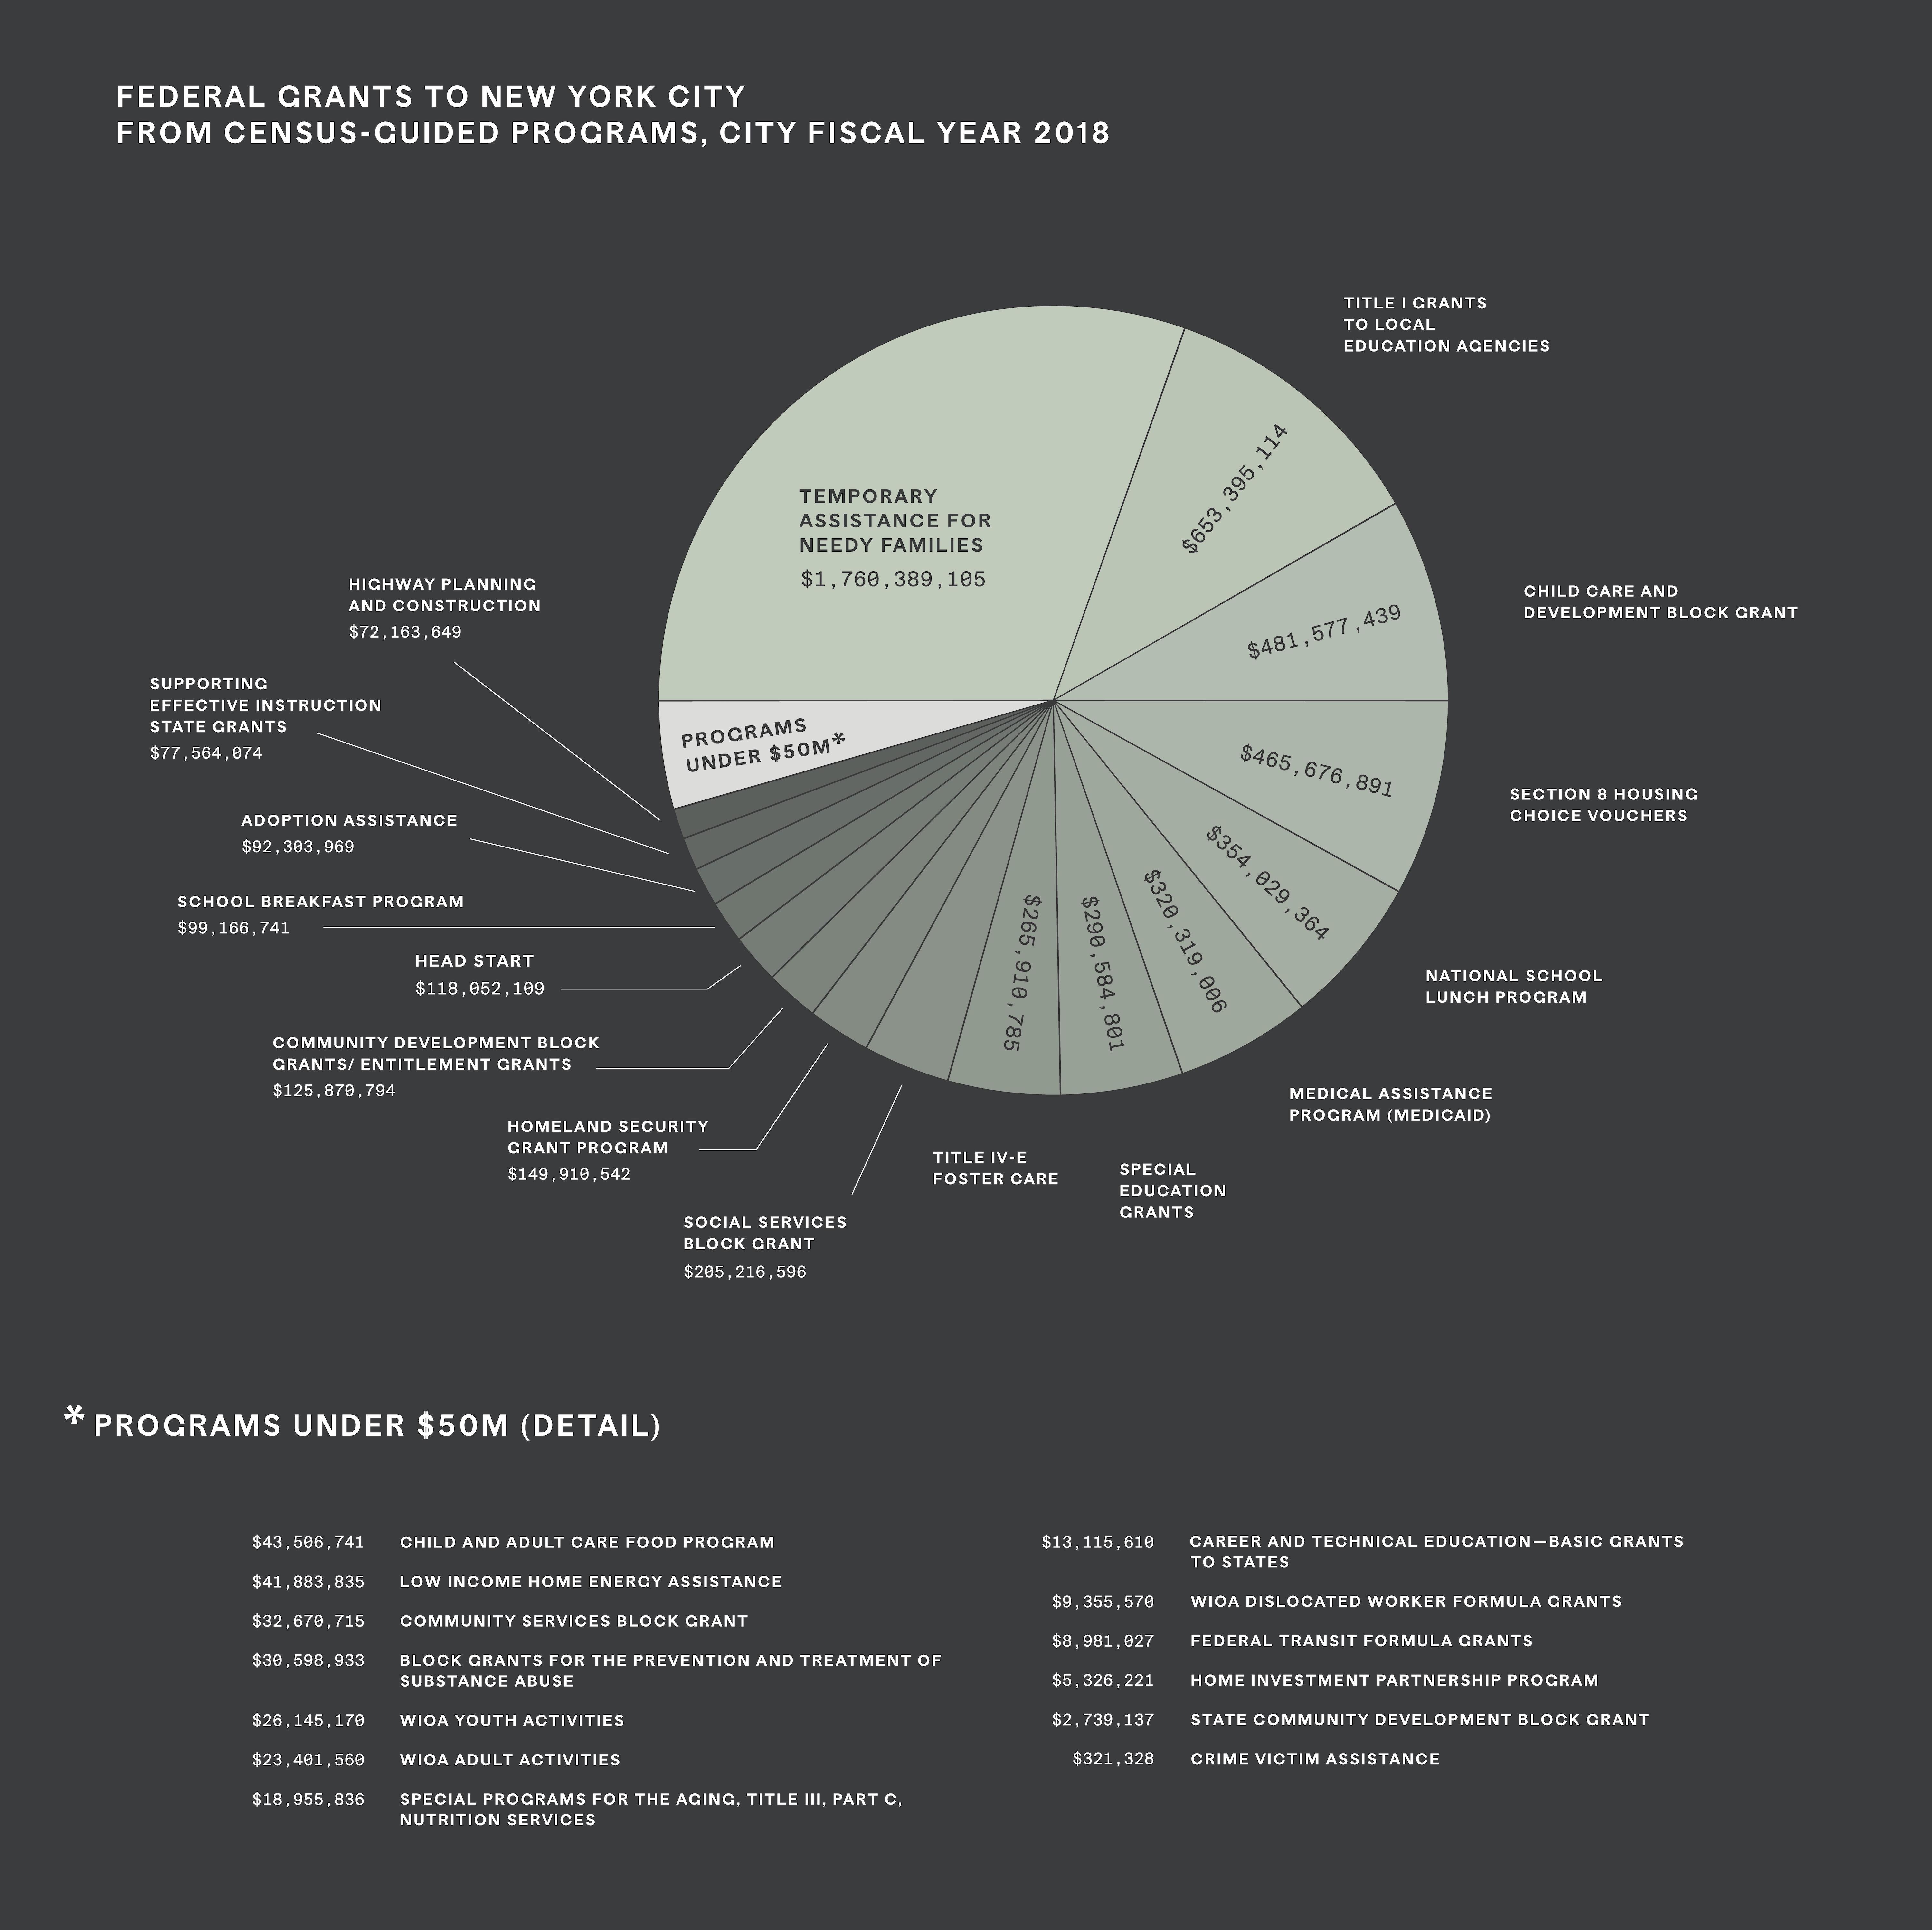 Federal grants to New York City from census-guided programs, city fiscal year 2018, 2019 pie chart